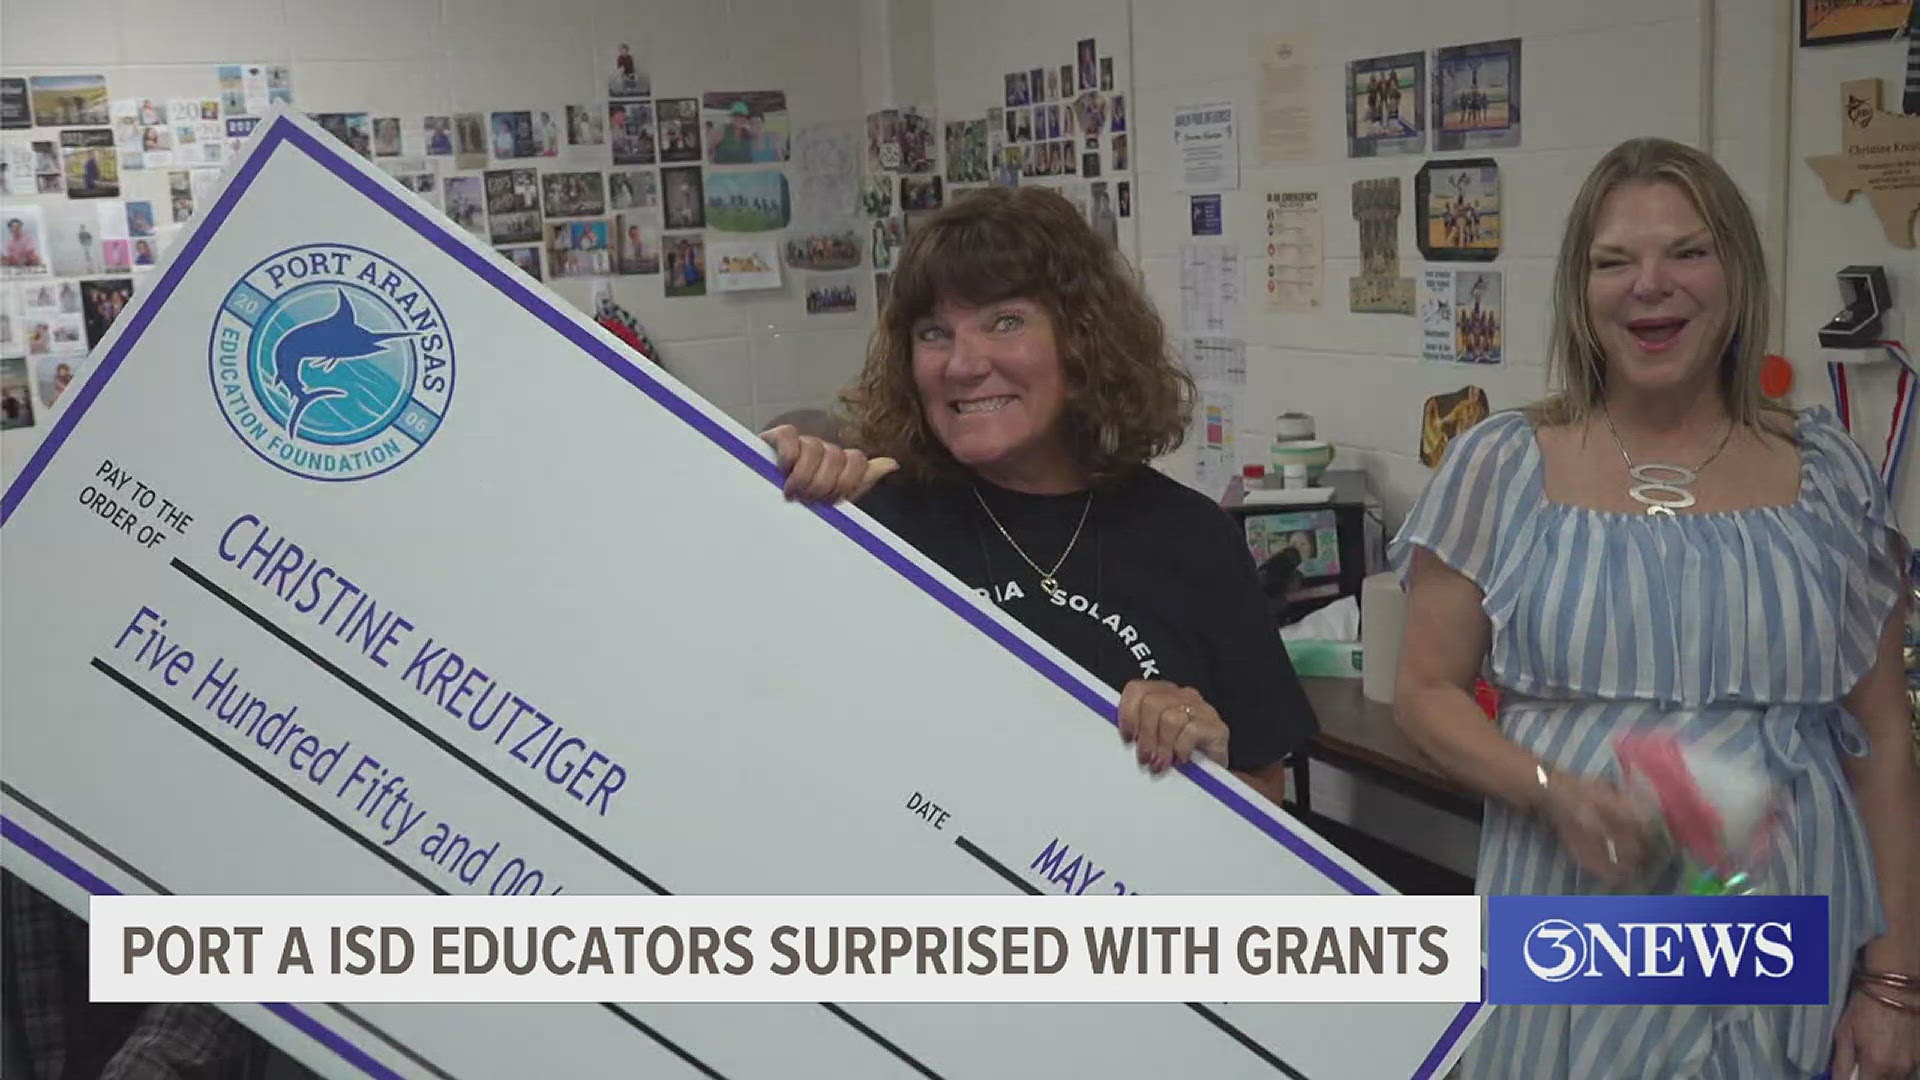 The Port Aransas Education Foundation began their journey to give away over $300,000 in grant awards to Port Aransas ISD educators!